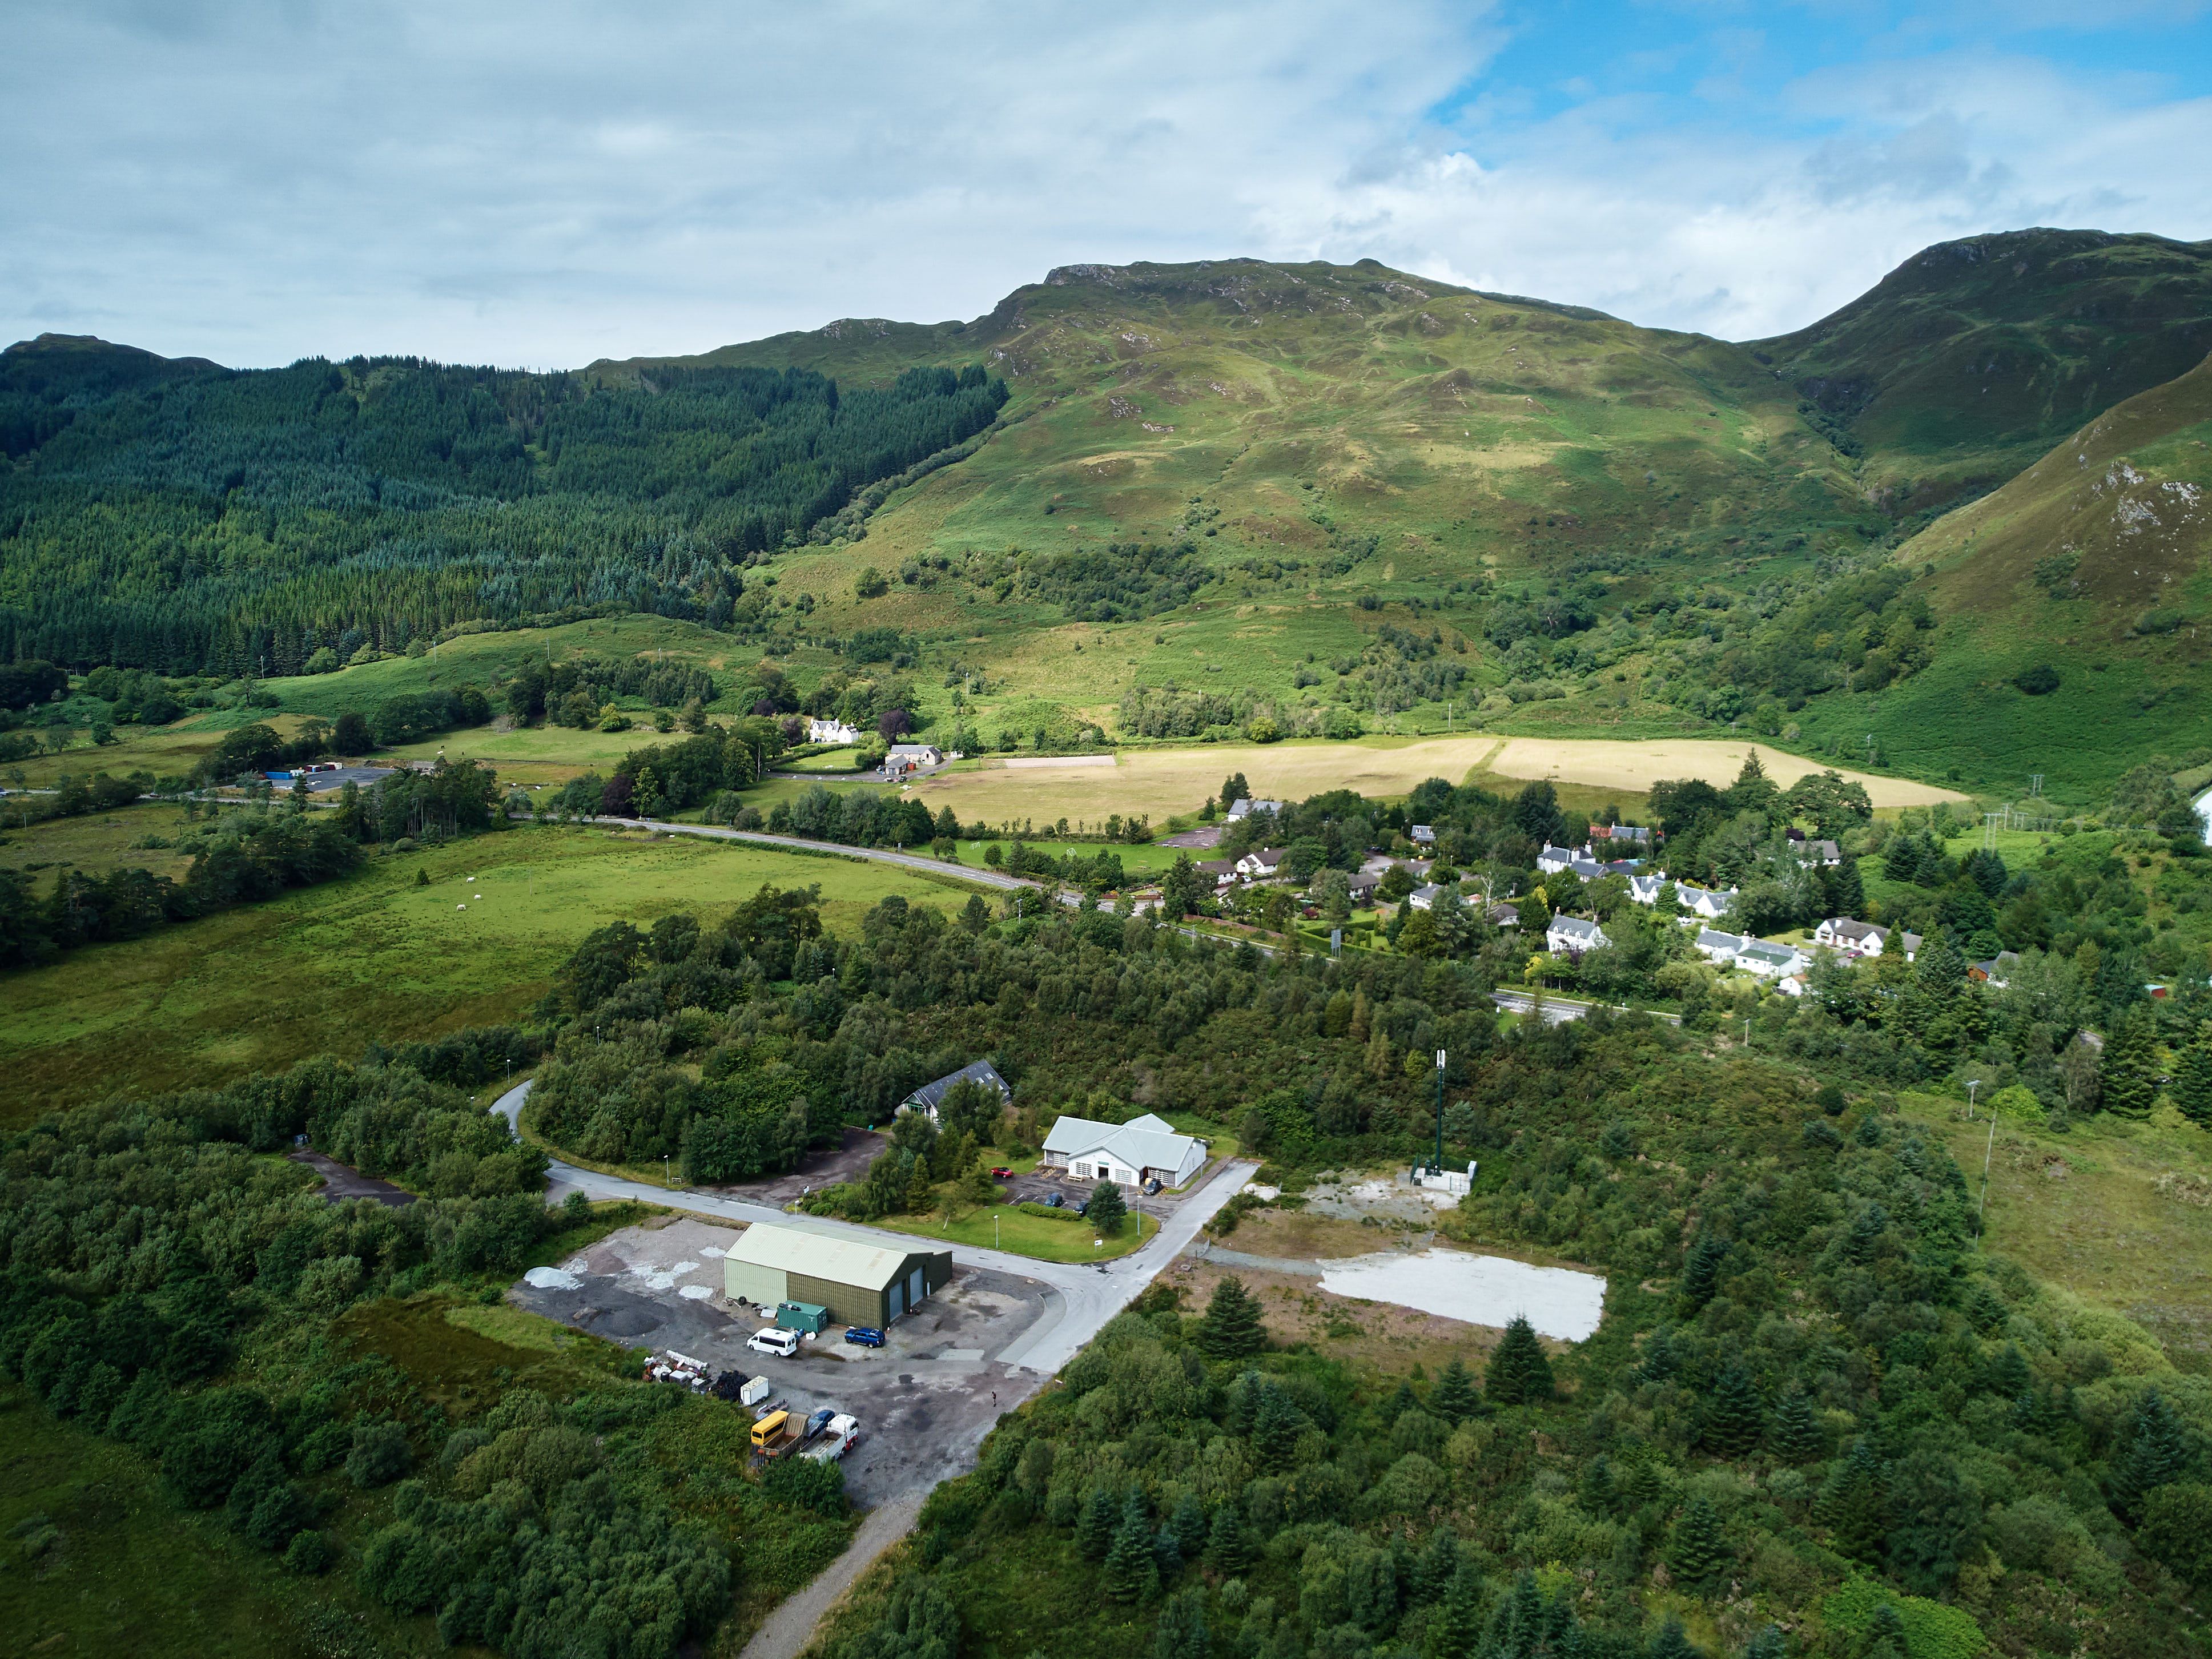 drone image of the Auchtertyre campus and surrounding area